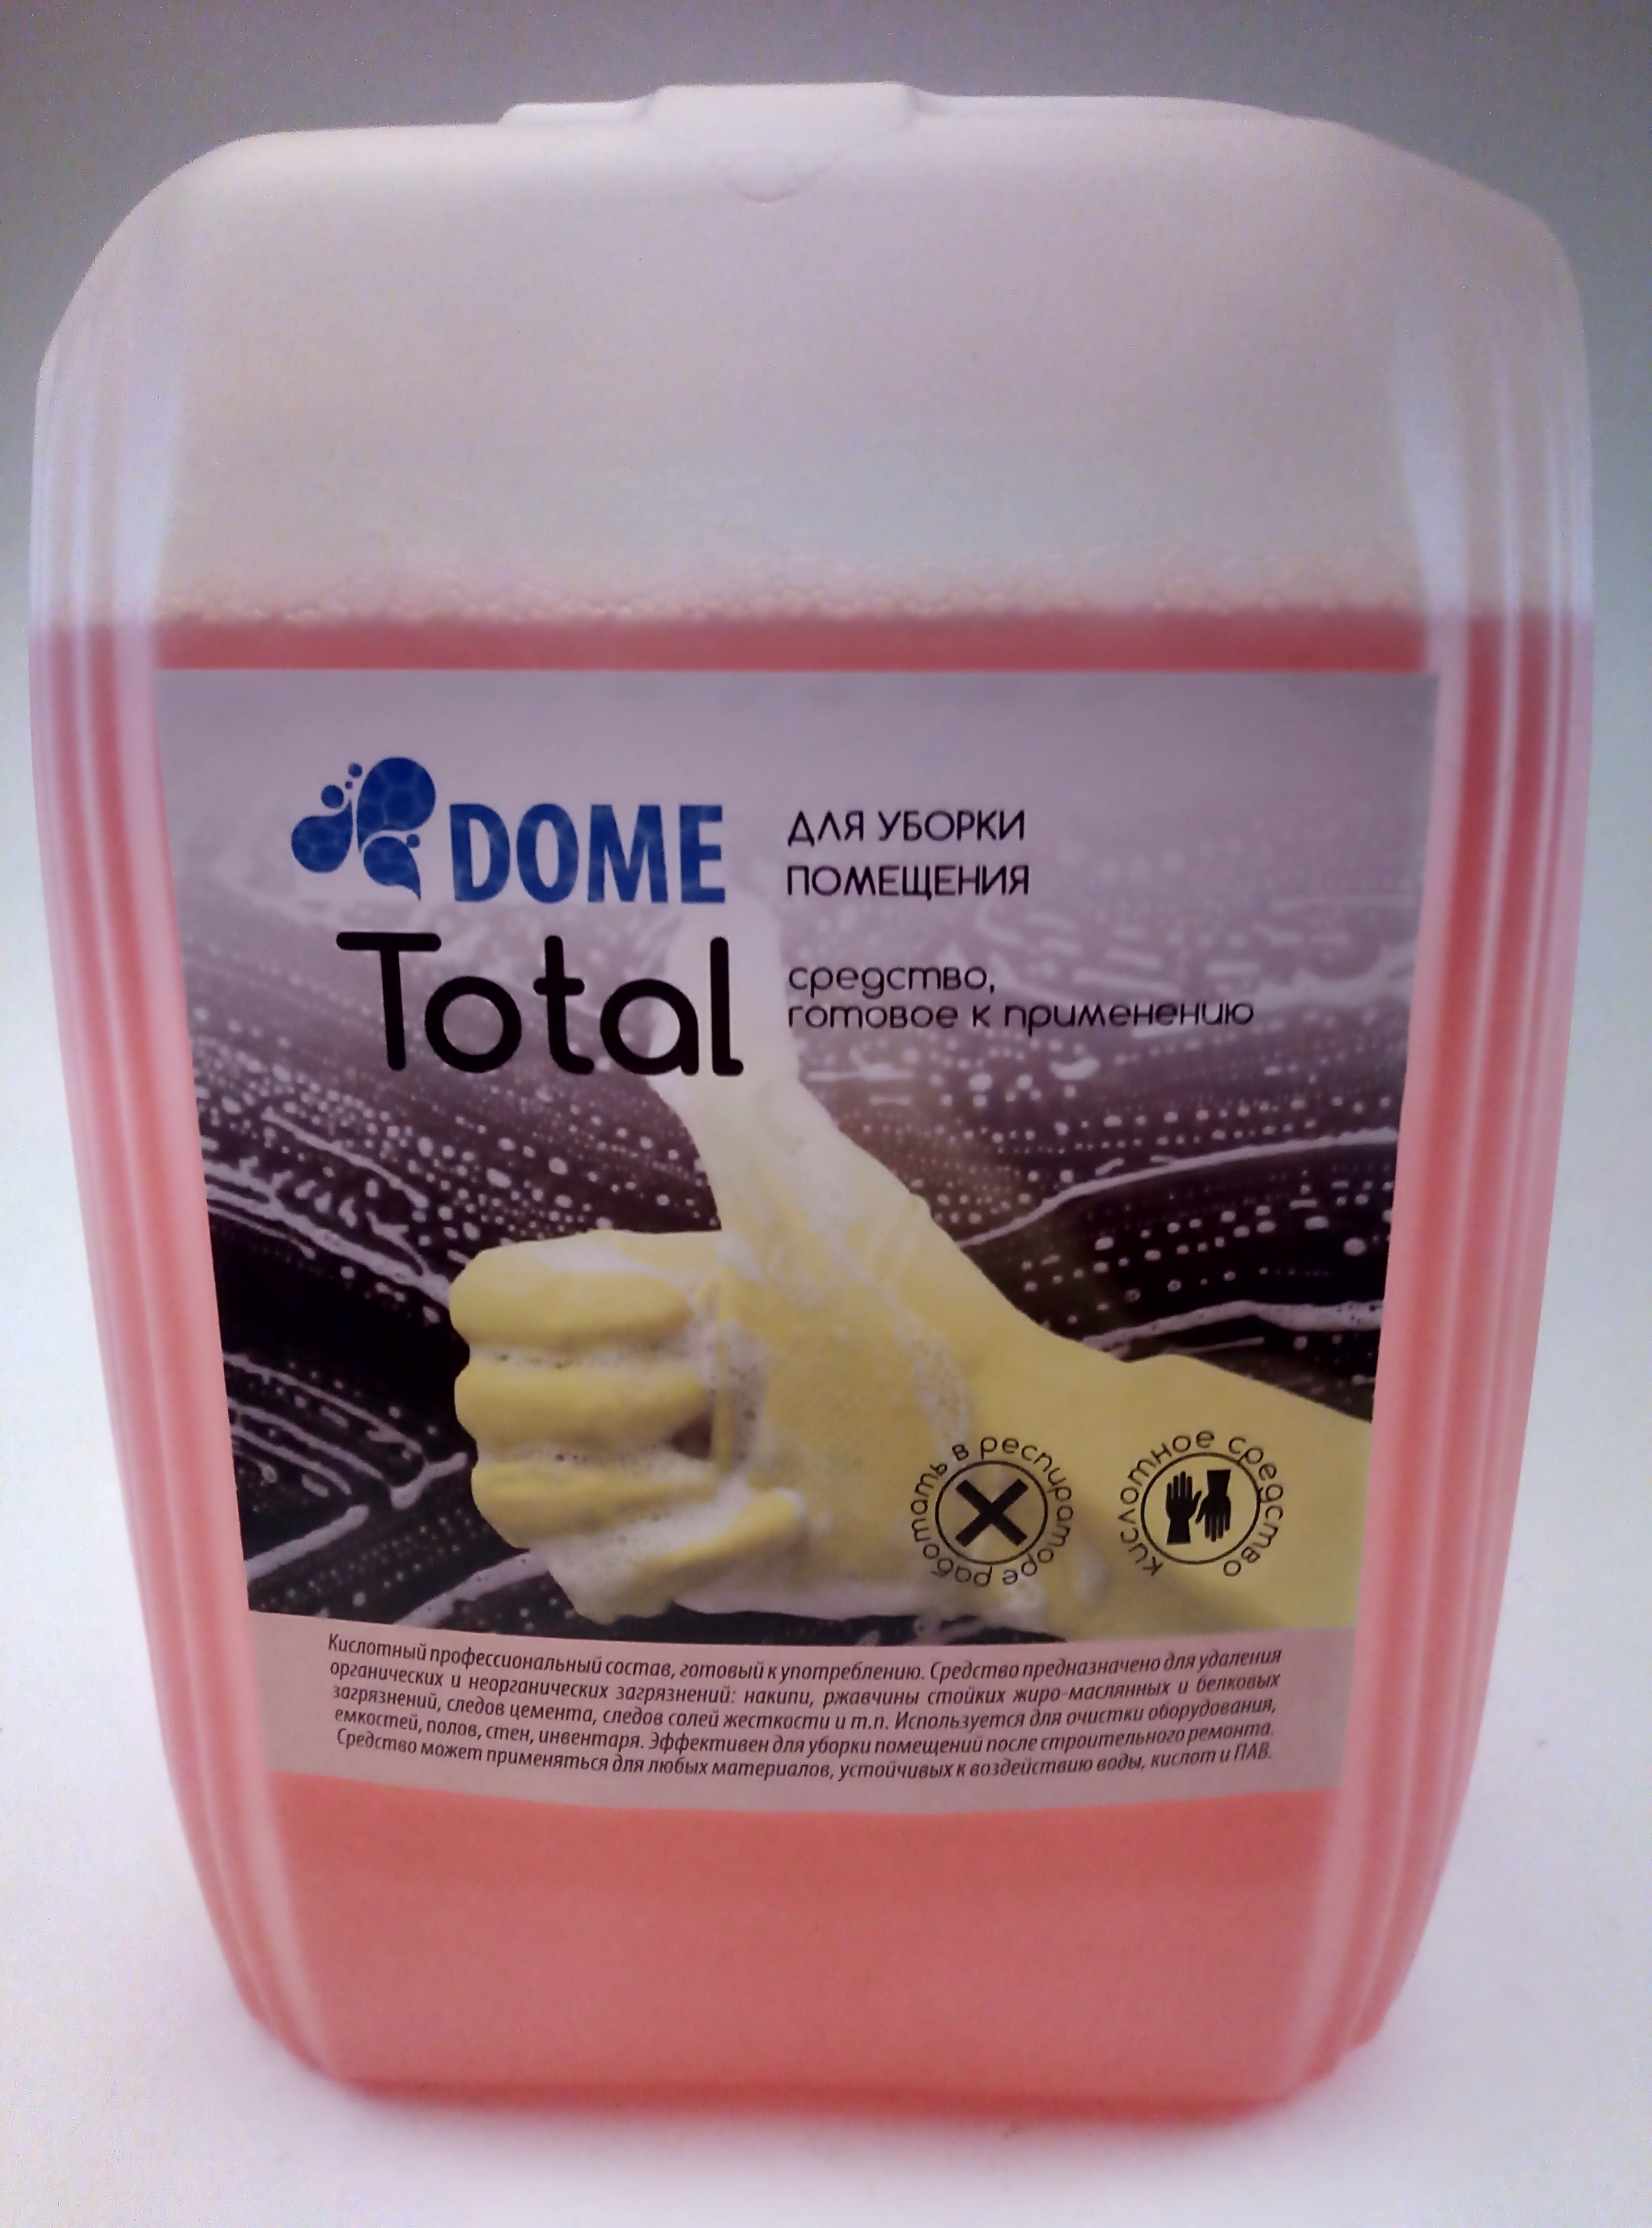 DOME Total